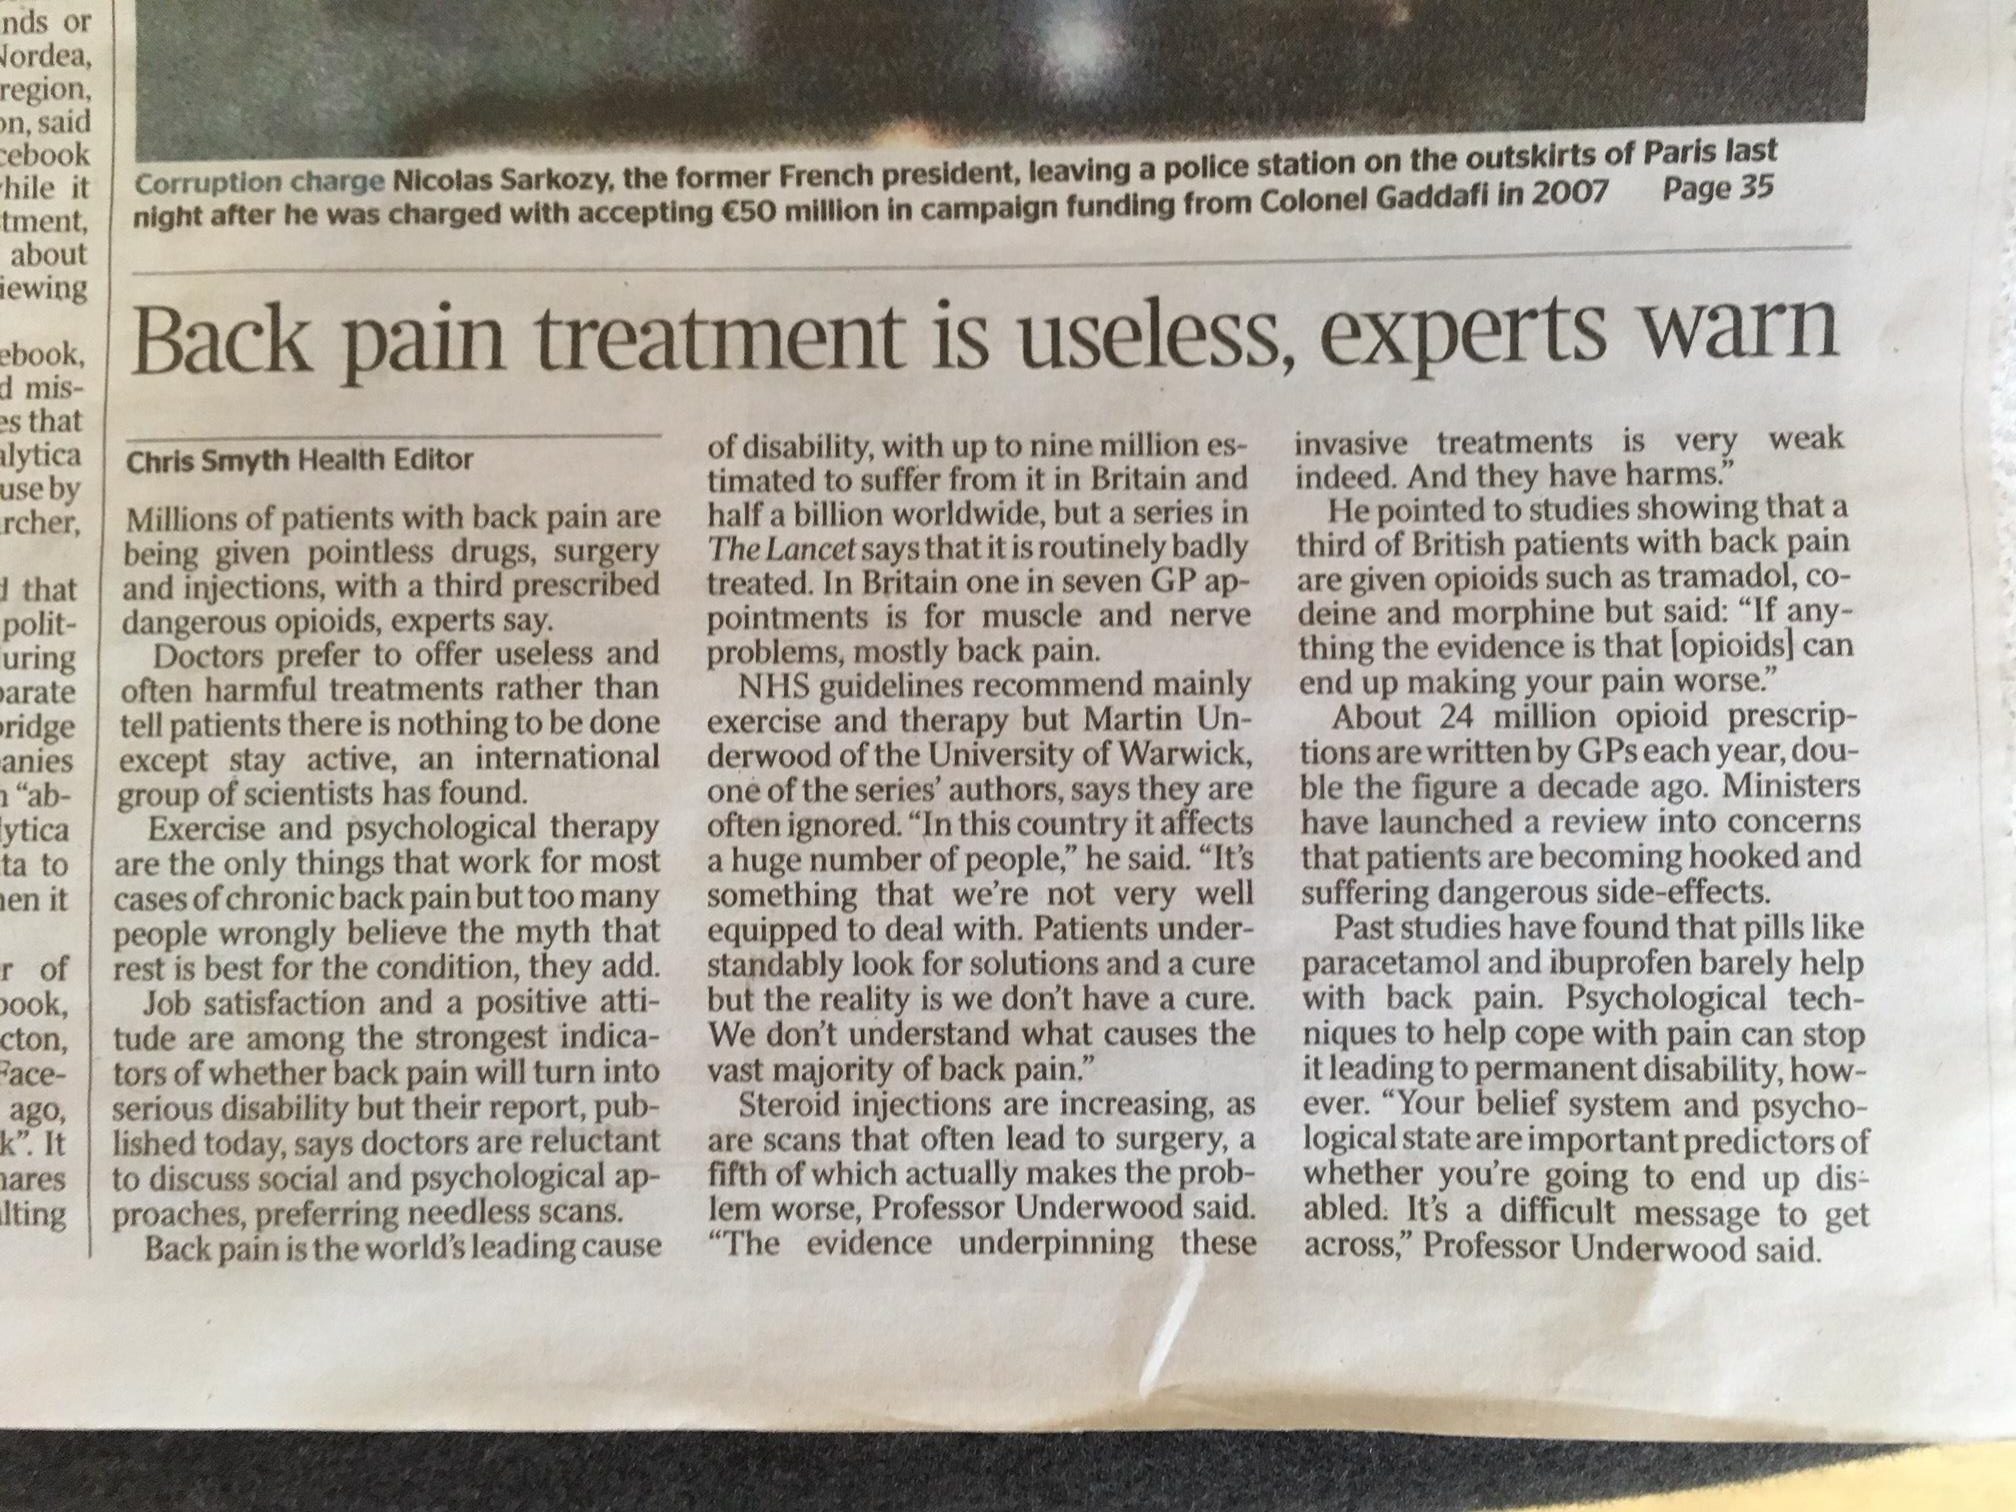 Article about pack pain 22 March 2018 in The Times